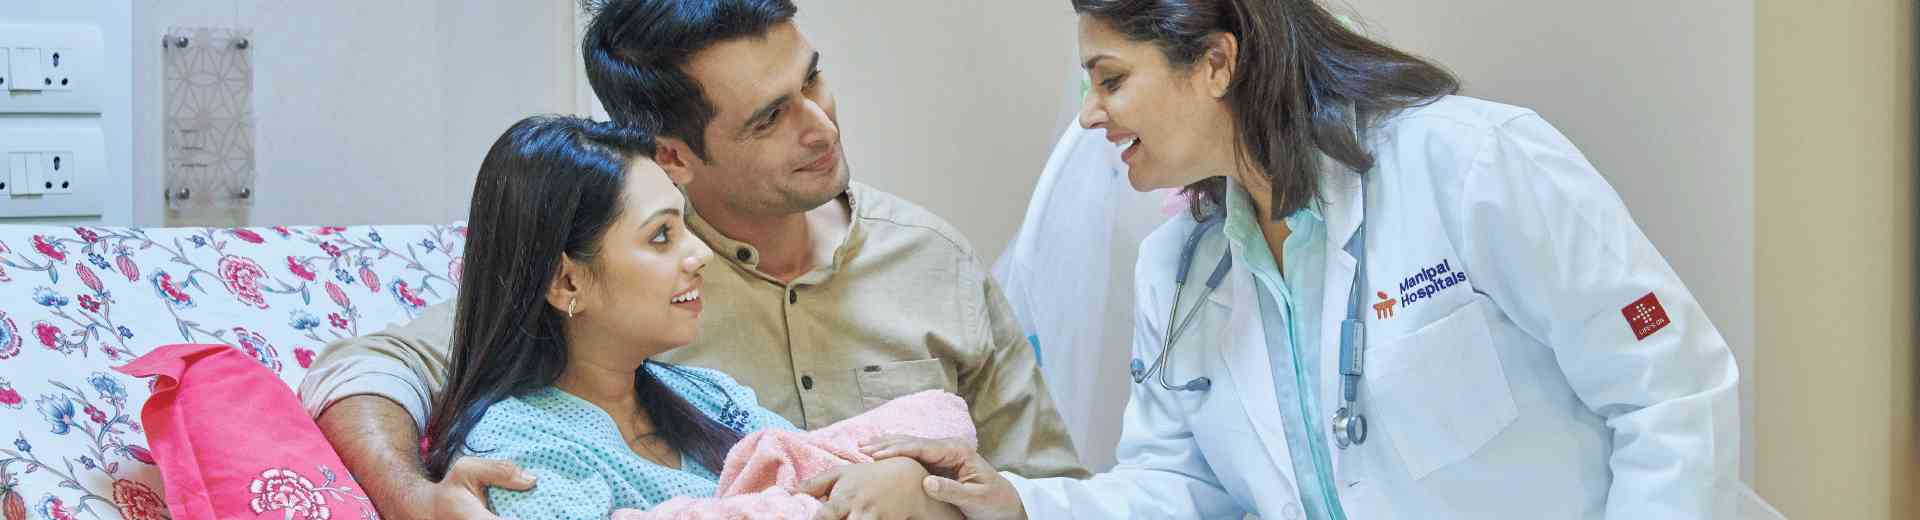 Post Natal Care for Mother and New Born Baby in Delhi